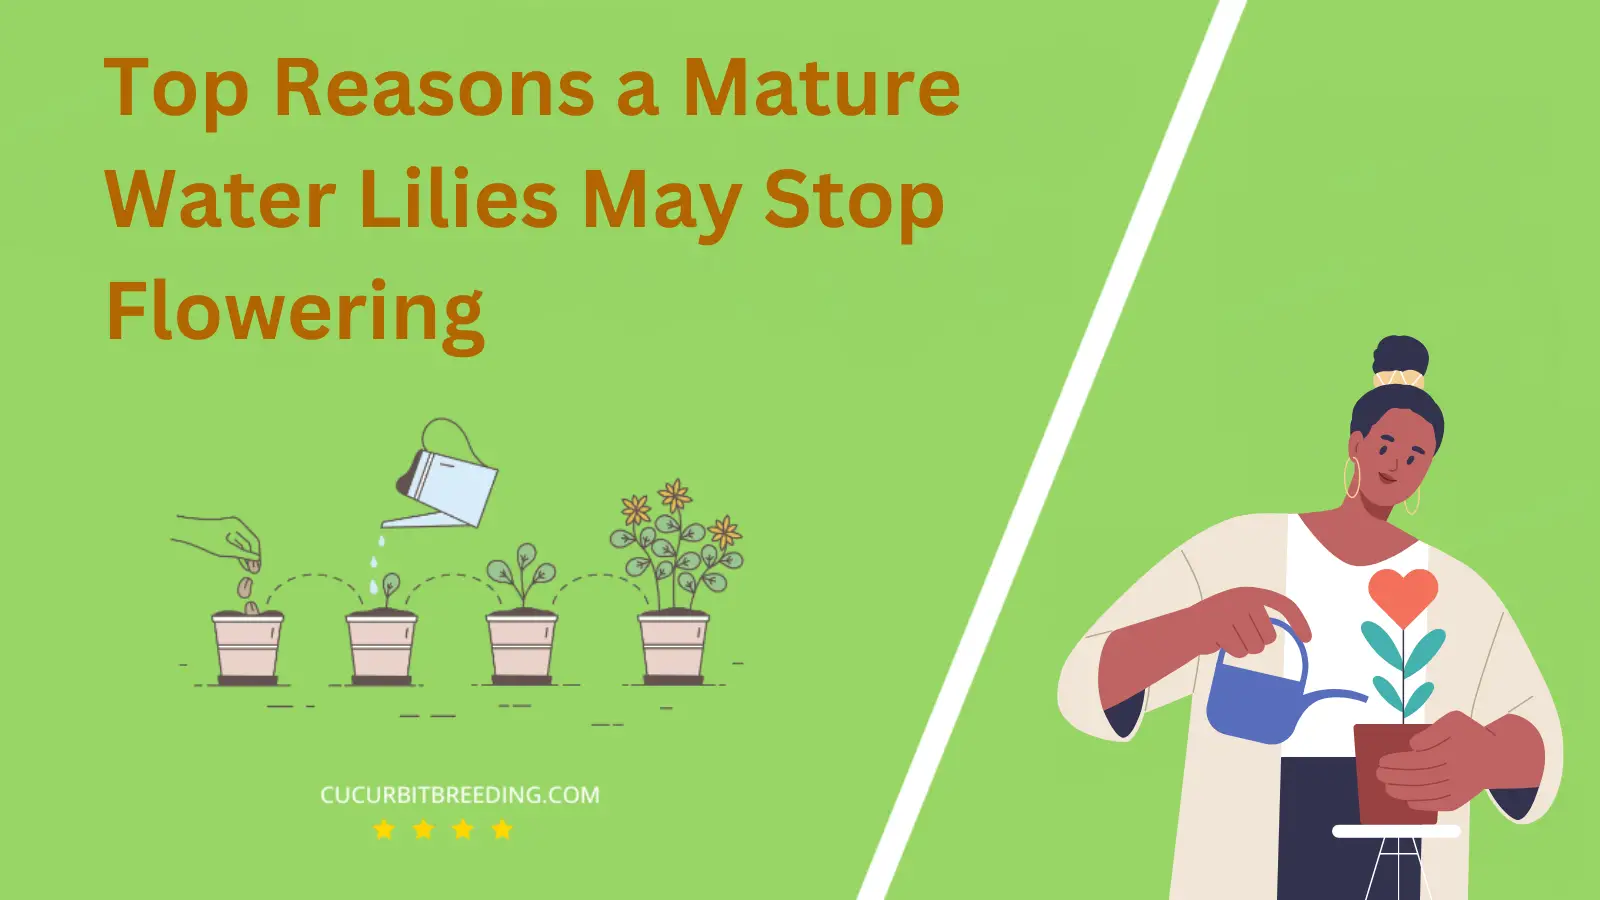 Top Reasons a Mature Water Lilies May Stop Flowering